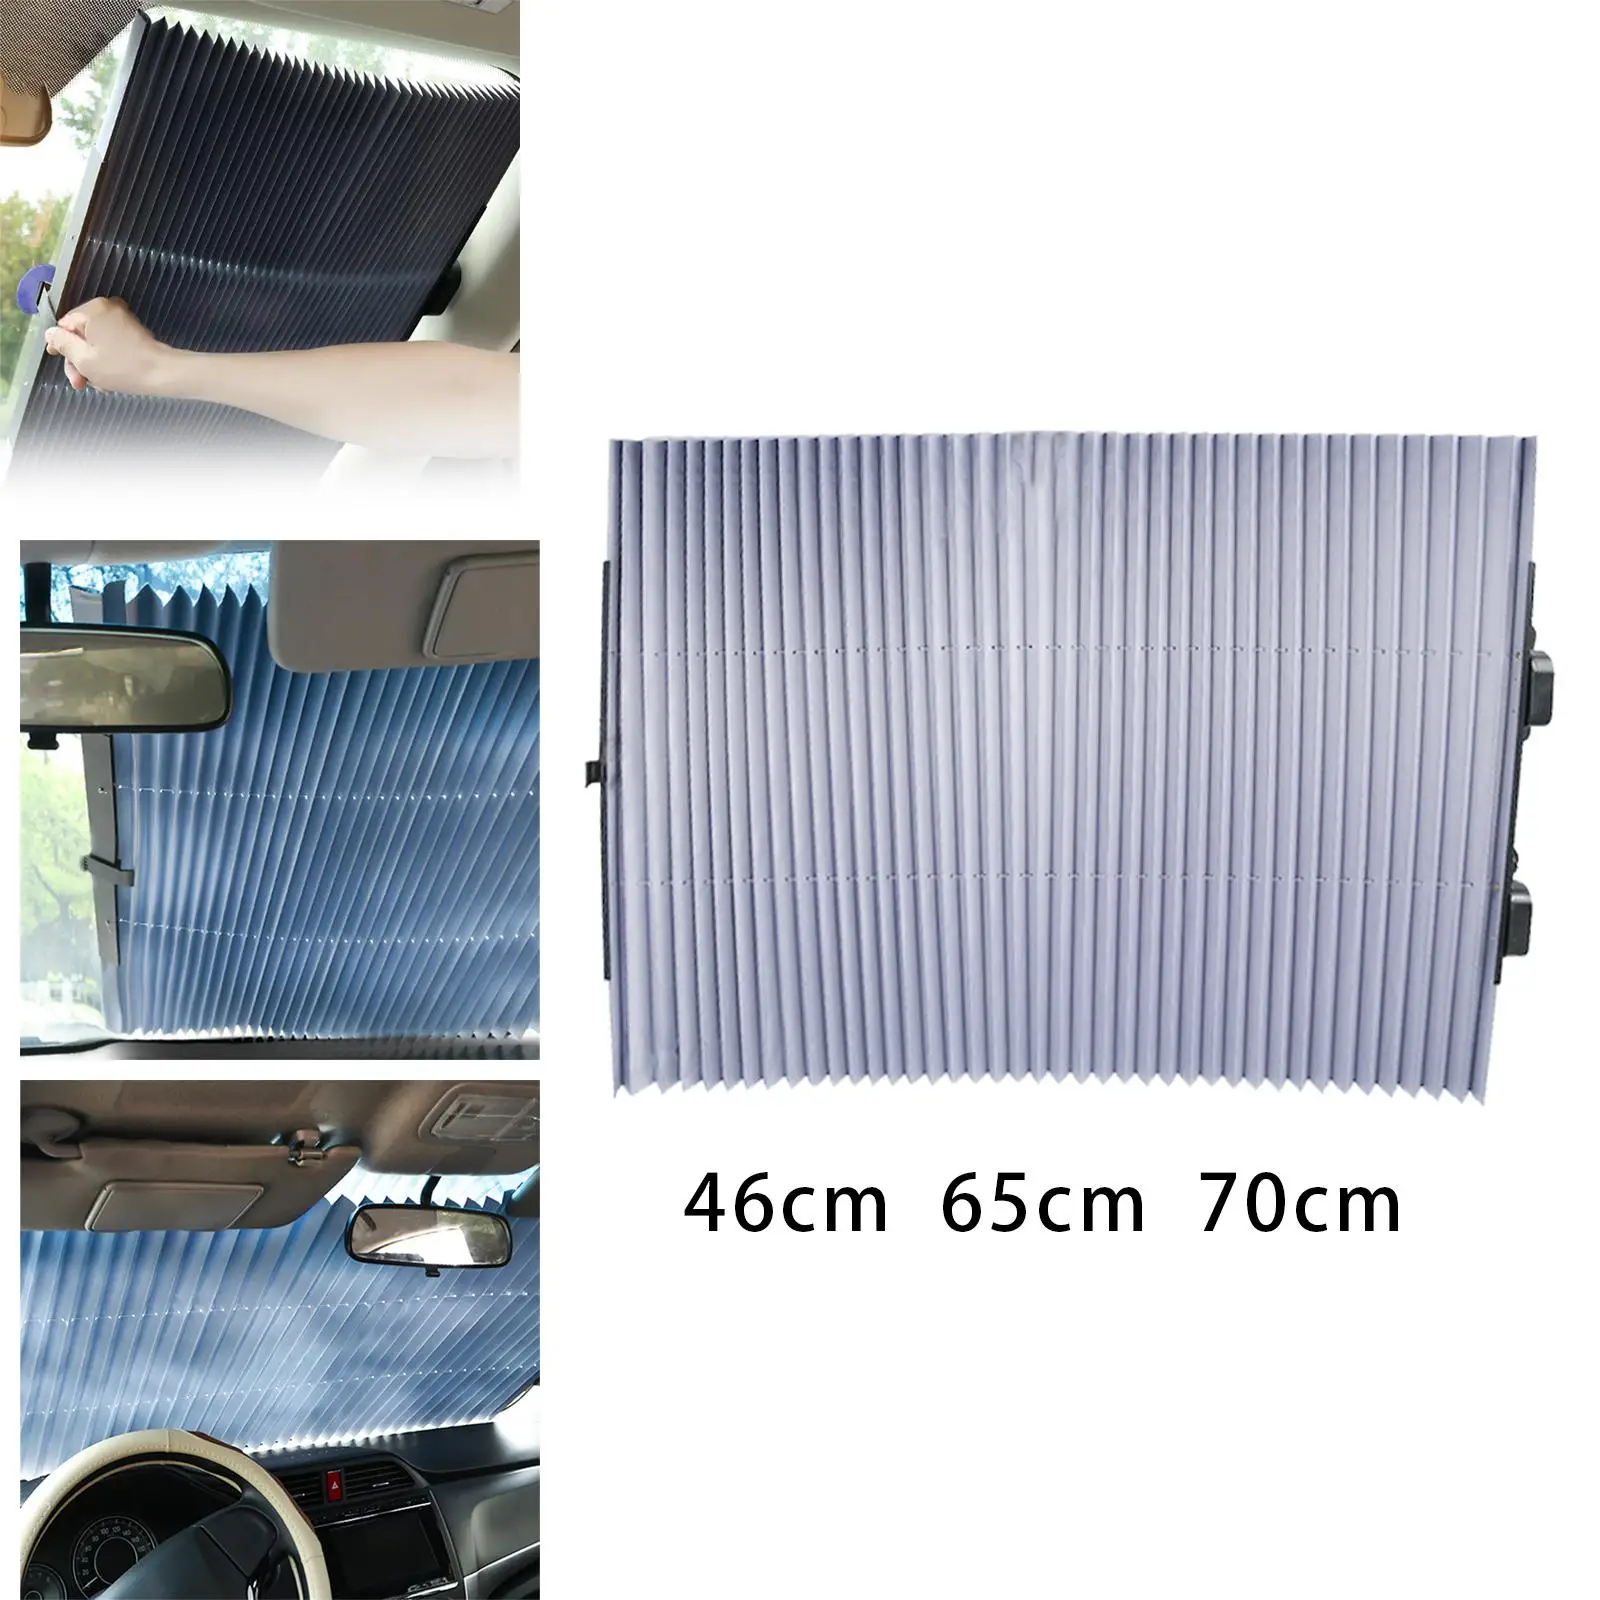 Retractable Windshield  Aluminum  Adjustable Car Styling Accessories Durable Suction Power  Curtains fit 